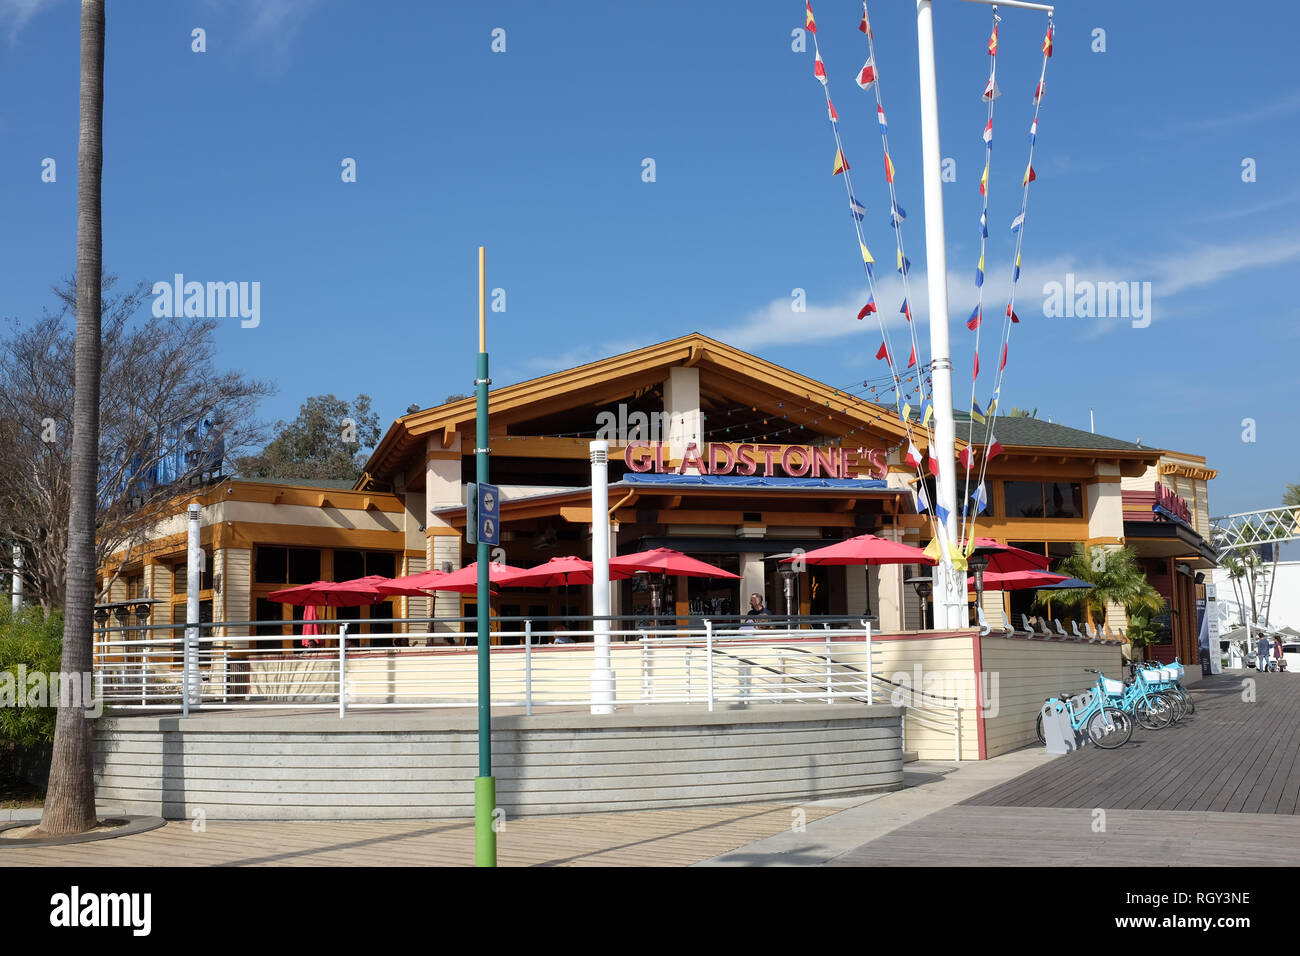 LONG BEACH, CALIFORNIA - JAN 30, 2019: Gladstones Restaurant on Pine and Shoreline Drive is an upmarket seafood restaurant specializes in shellfish di Stock Photo